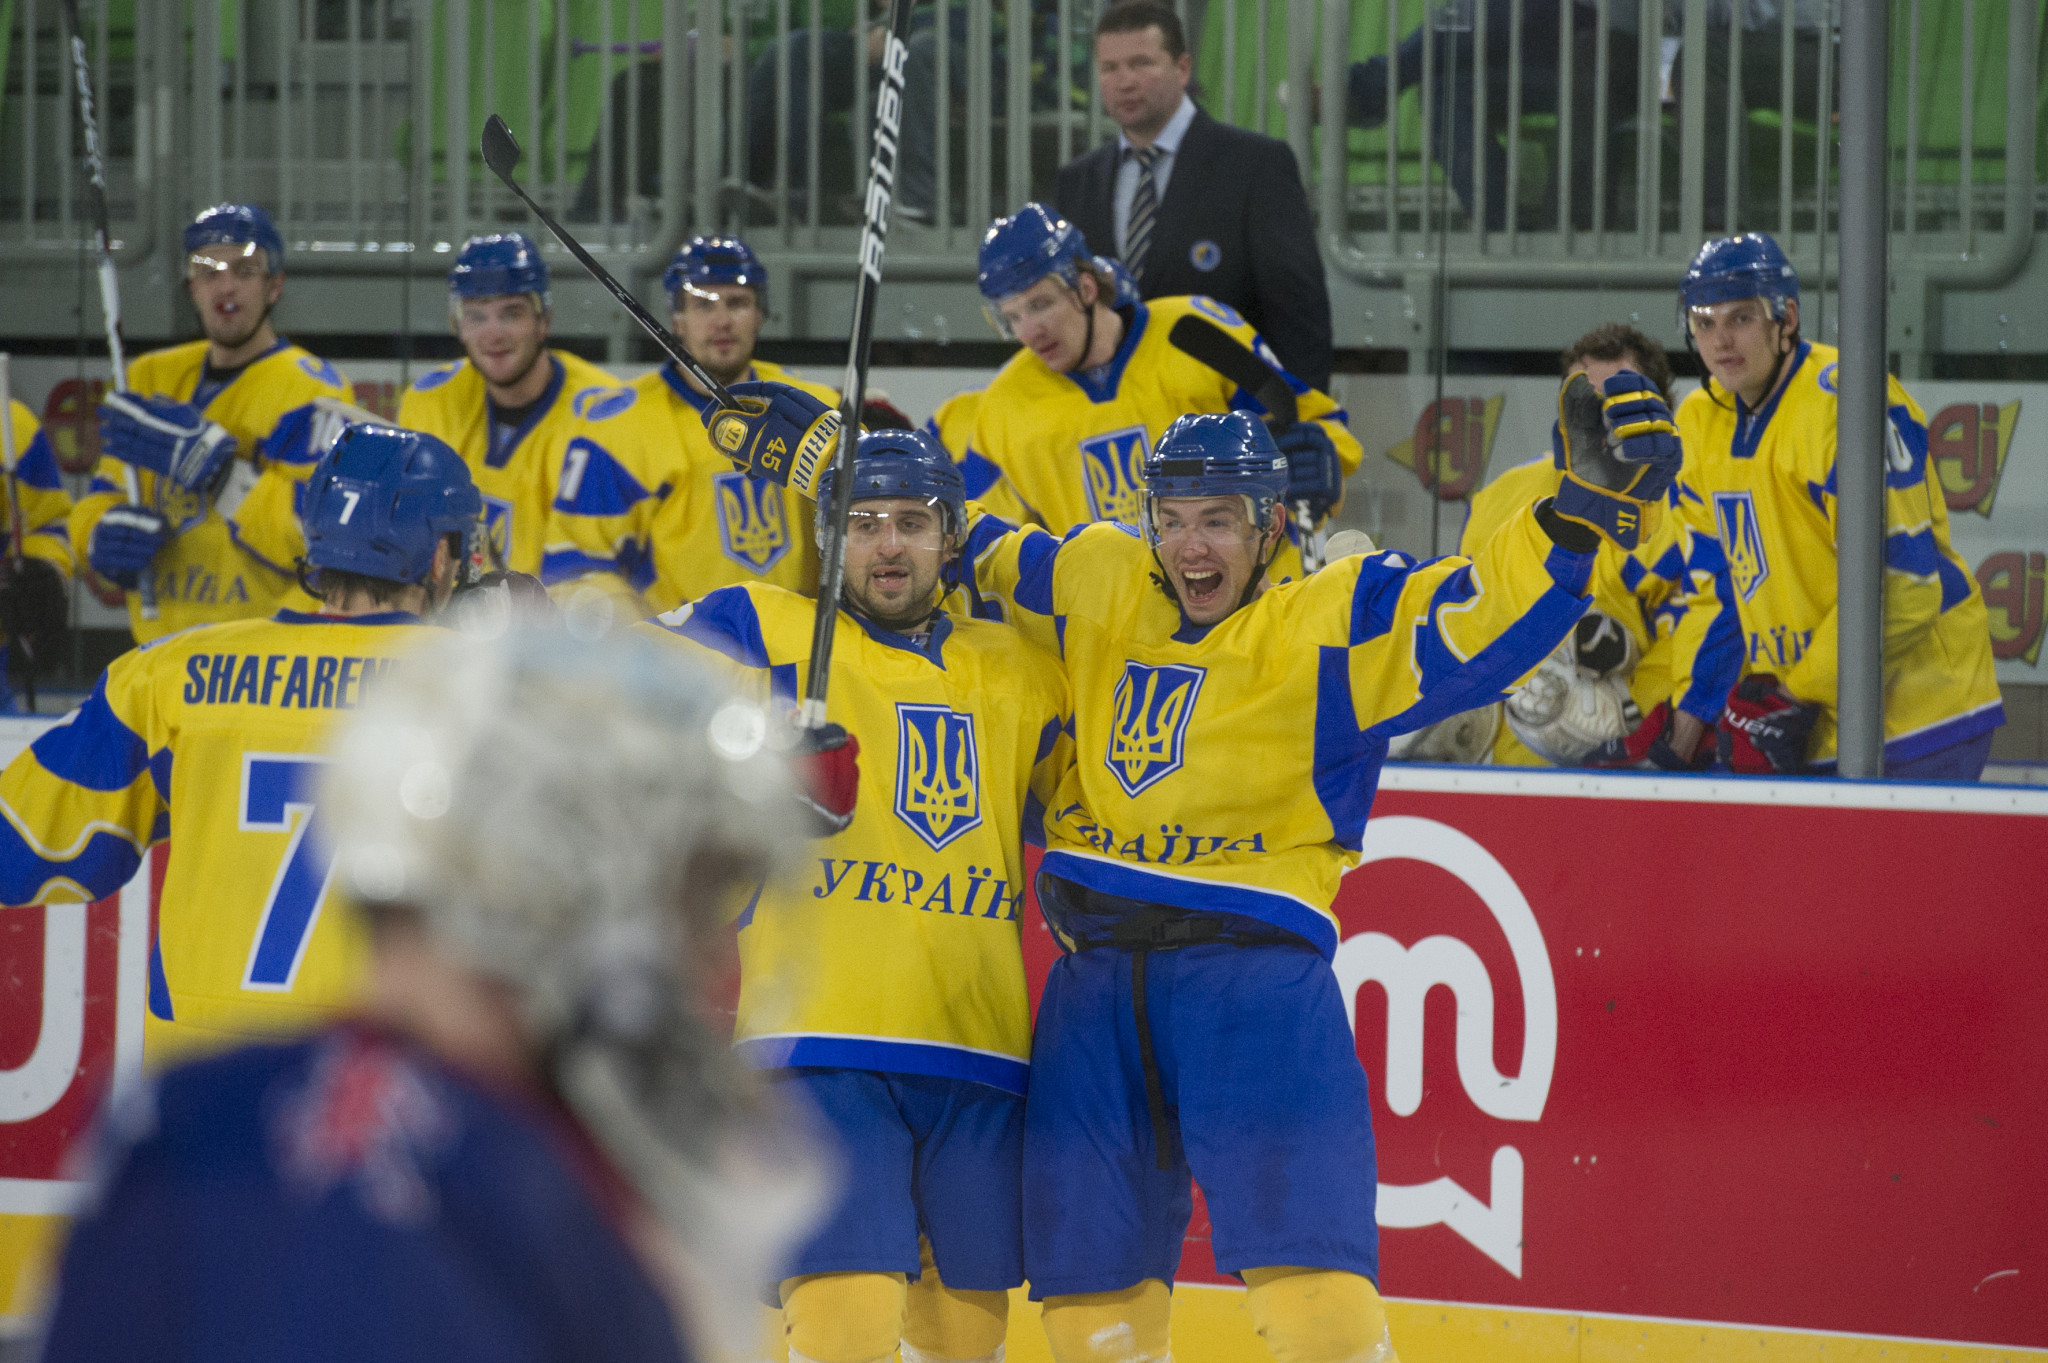 Suspensions were imposed on two players suspected of attempted match-fixing from Ukraine following an investigation by the country's national governing body for ice hockey and the national police ©Getty Images